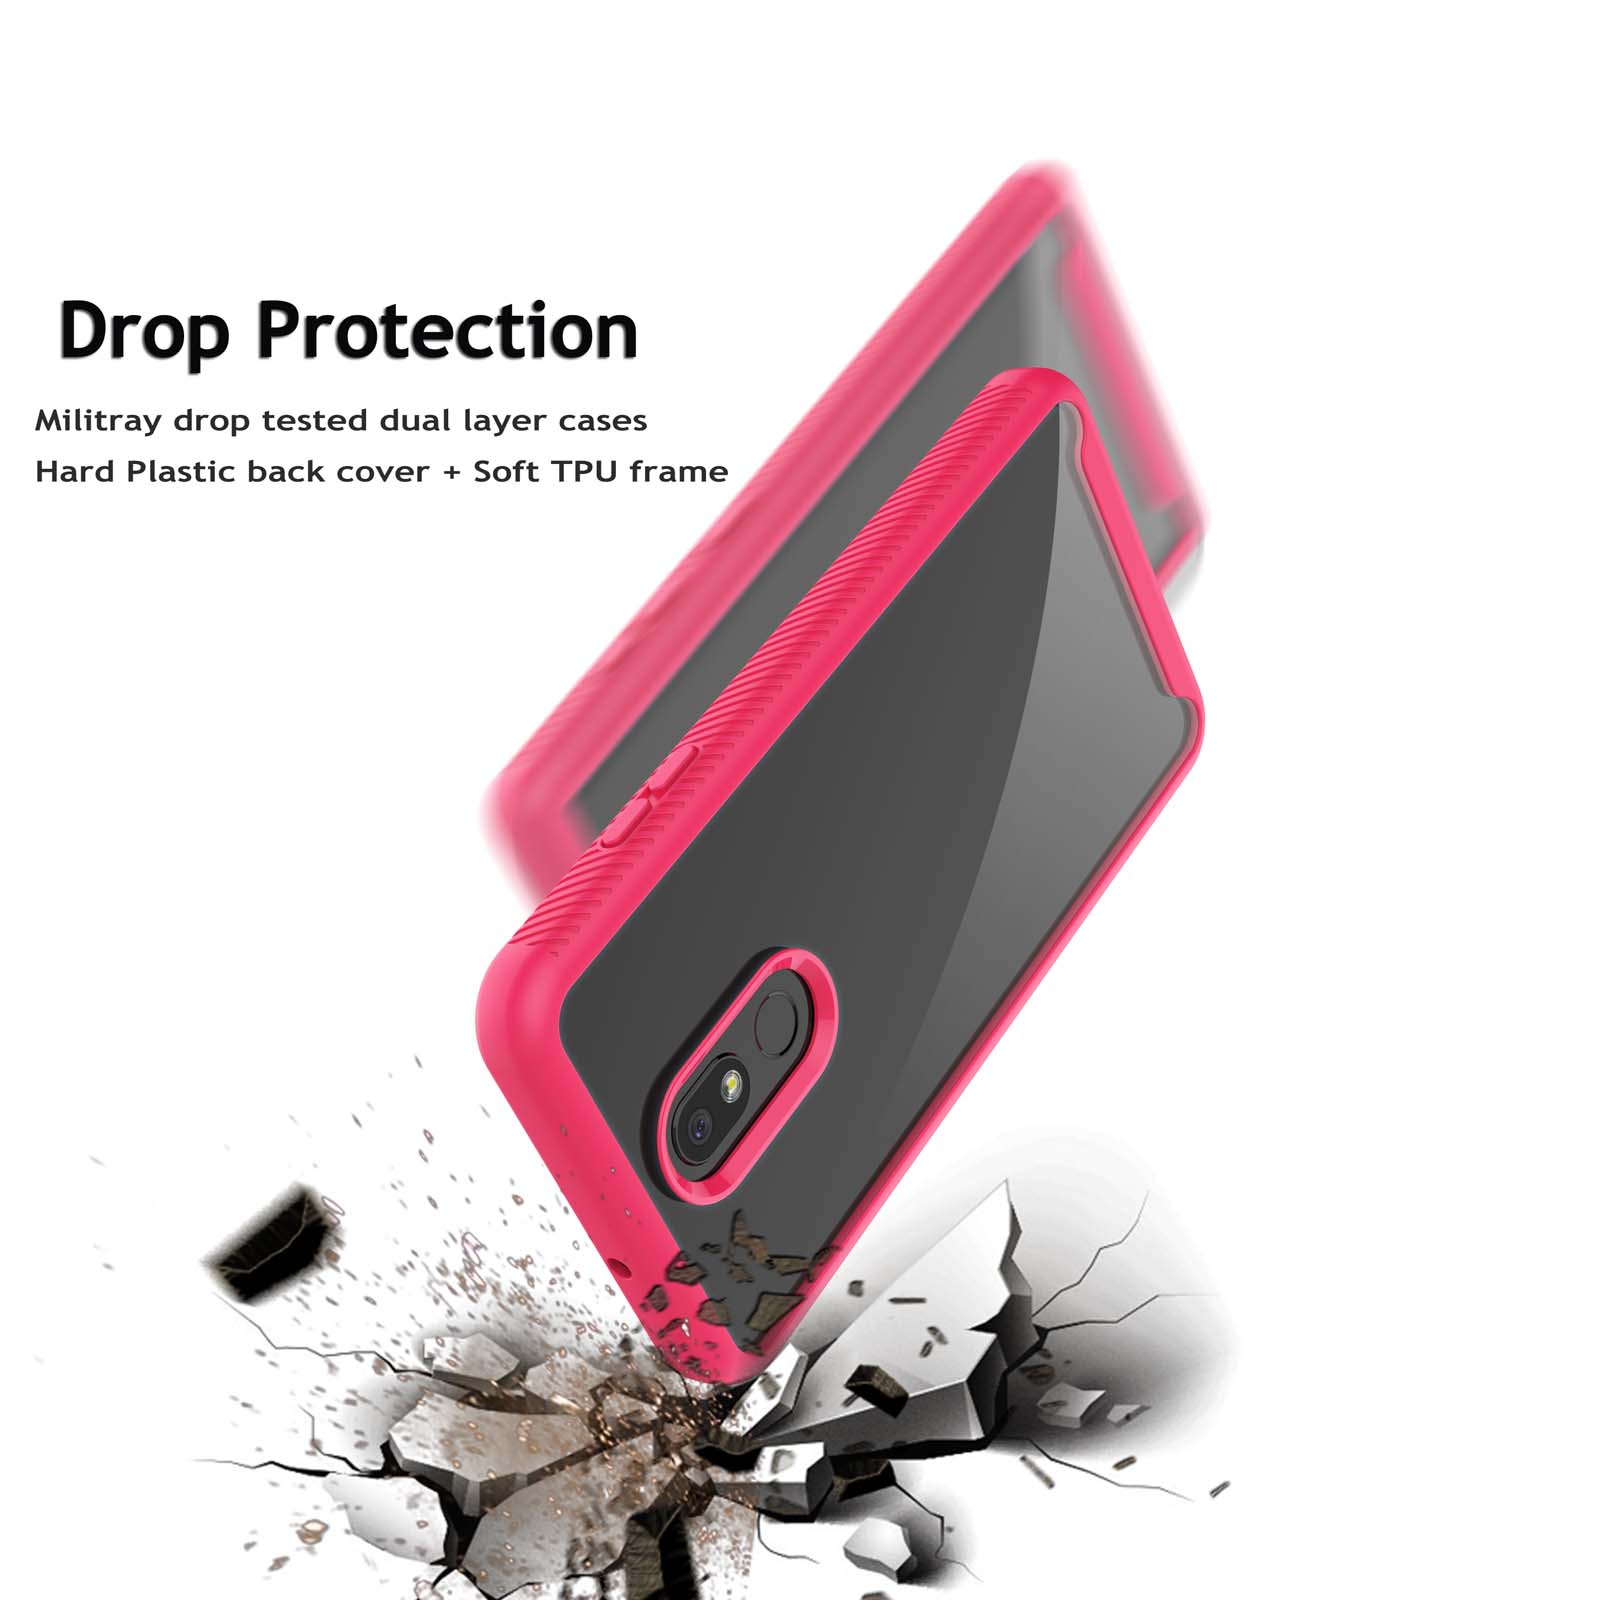 LG Stylo 6 Case, Sturdy Case for 2020 LG Stylo 6, Njjex Full-Body Rugged Transparent Clear Back Bumper Case Cover for LG Stylo 6 6.8" 2020 Not LG Stylo 5 6.2" -Hot Pink - image 4 of 10